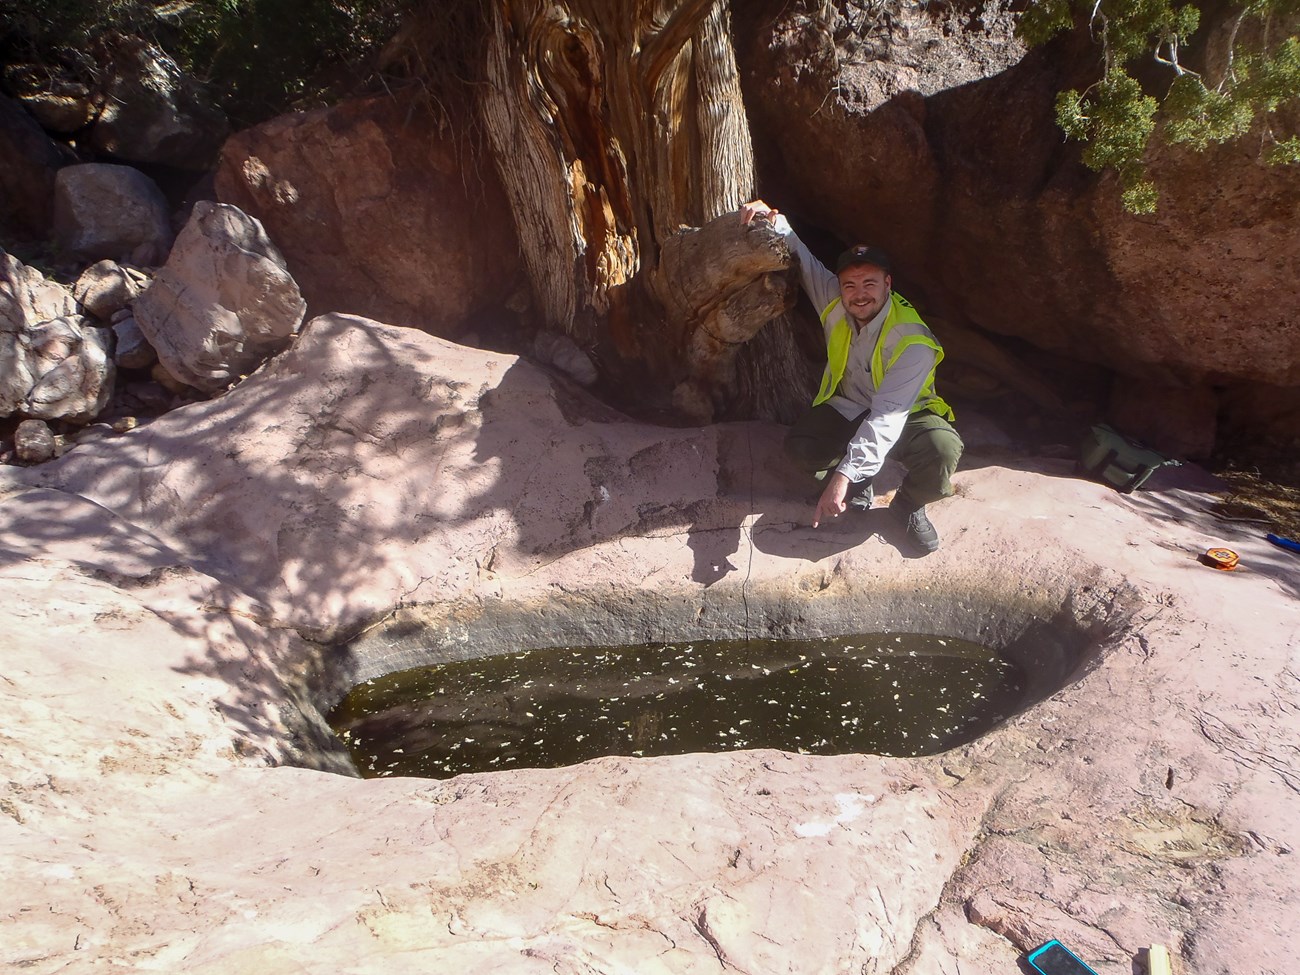 A man steadies himself on a thick tree trunk while crouching down and pointing into a pool of water that lies in an eroded-out depression in tan bedrock.